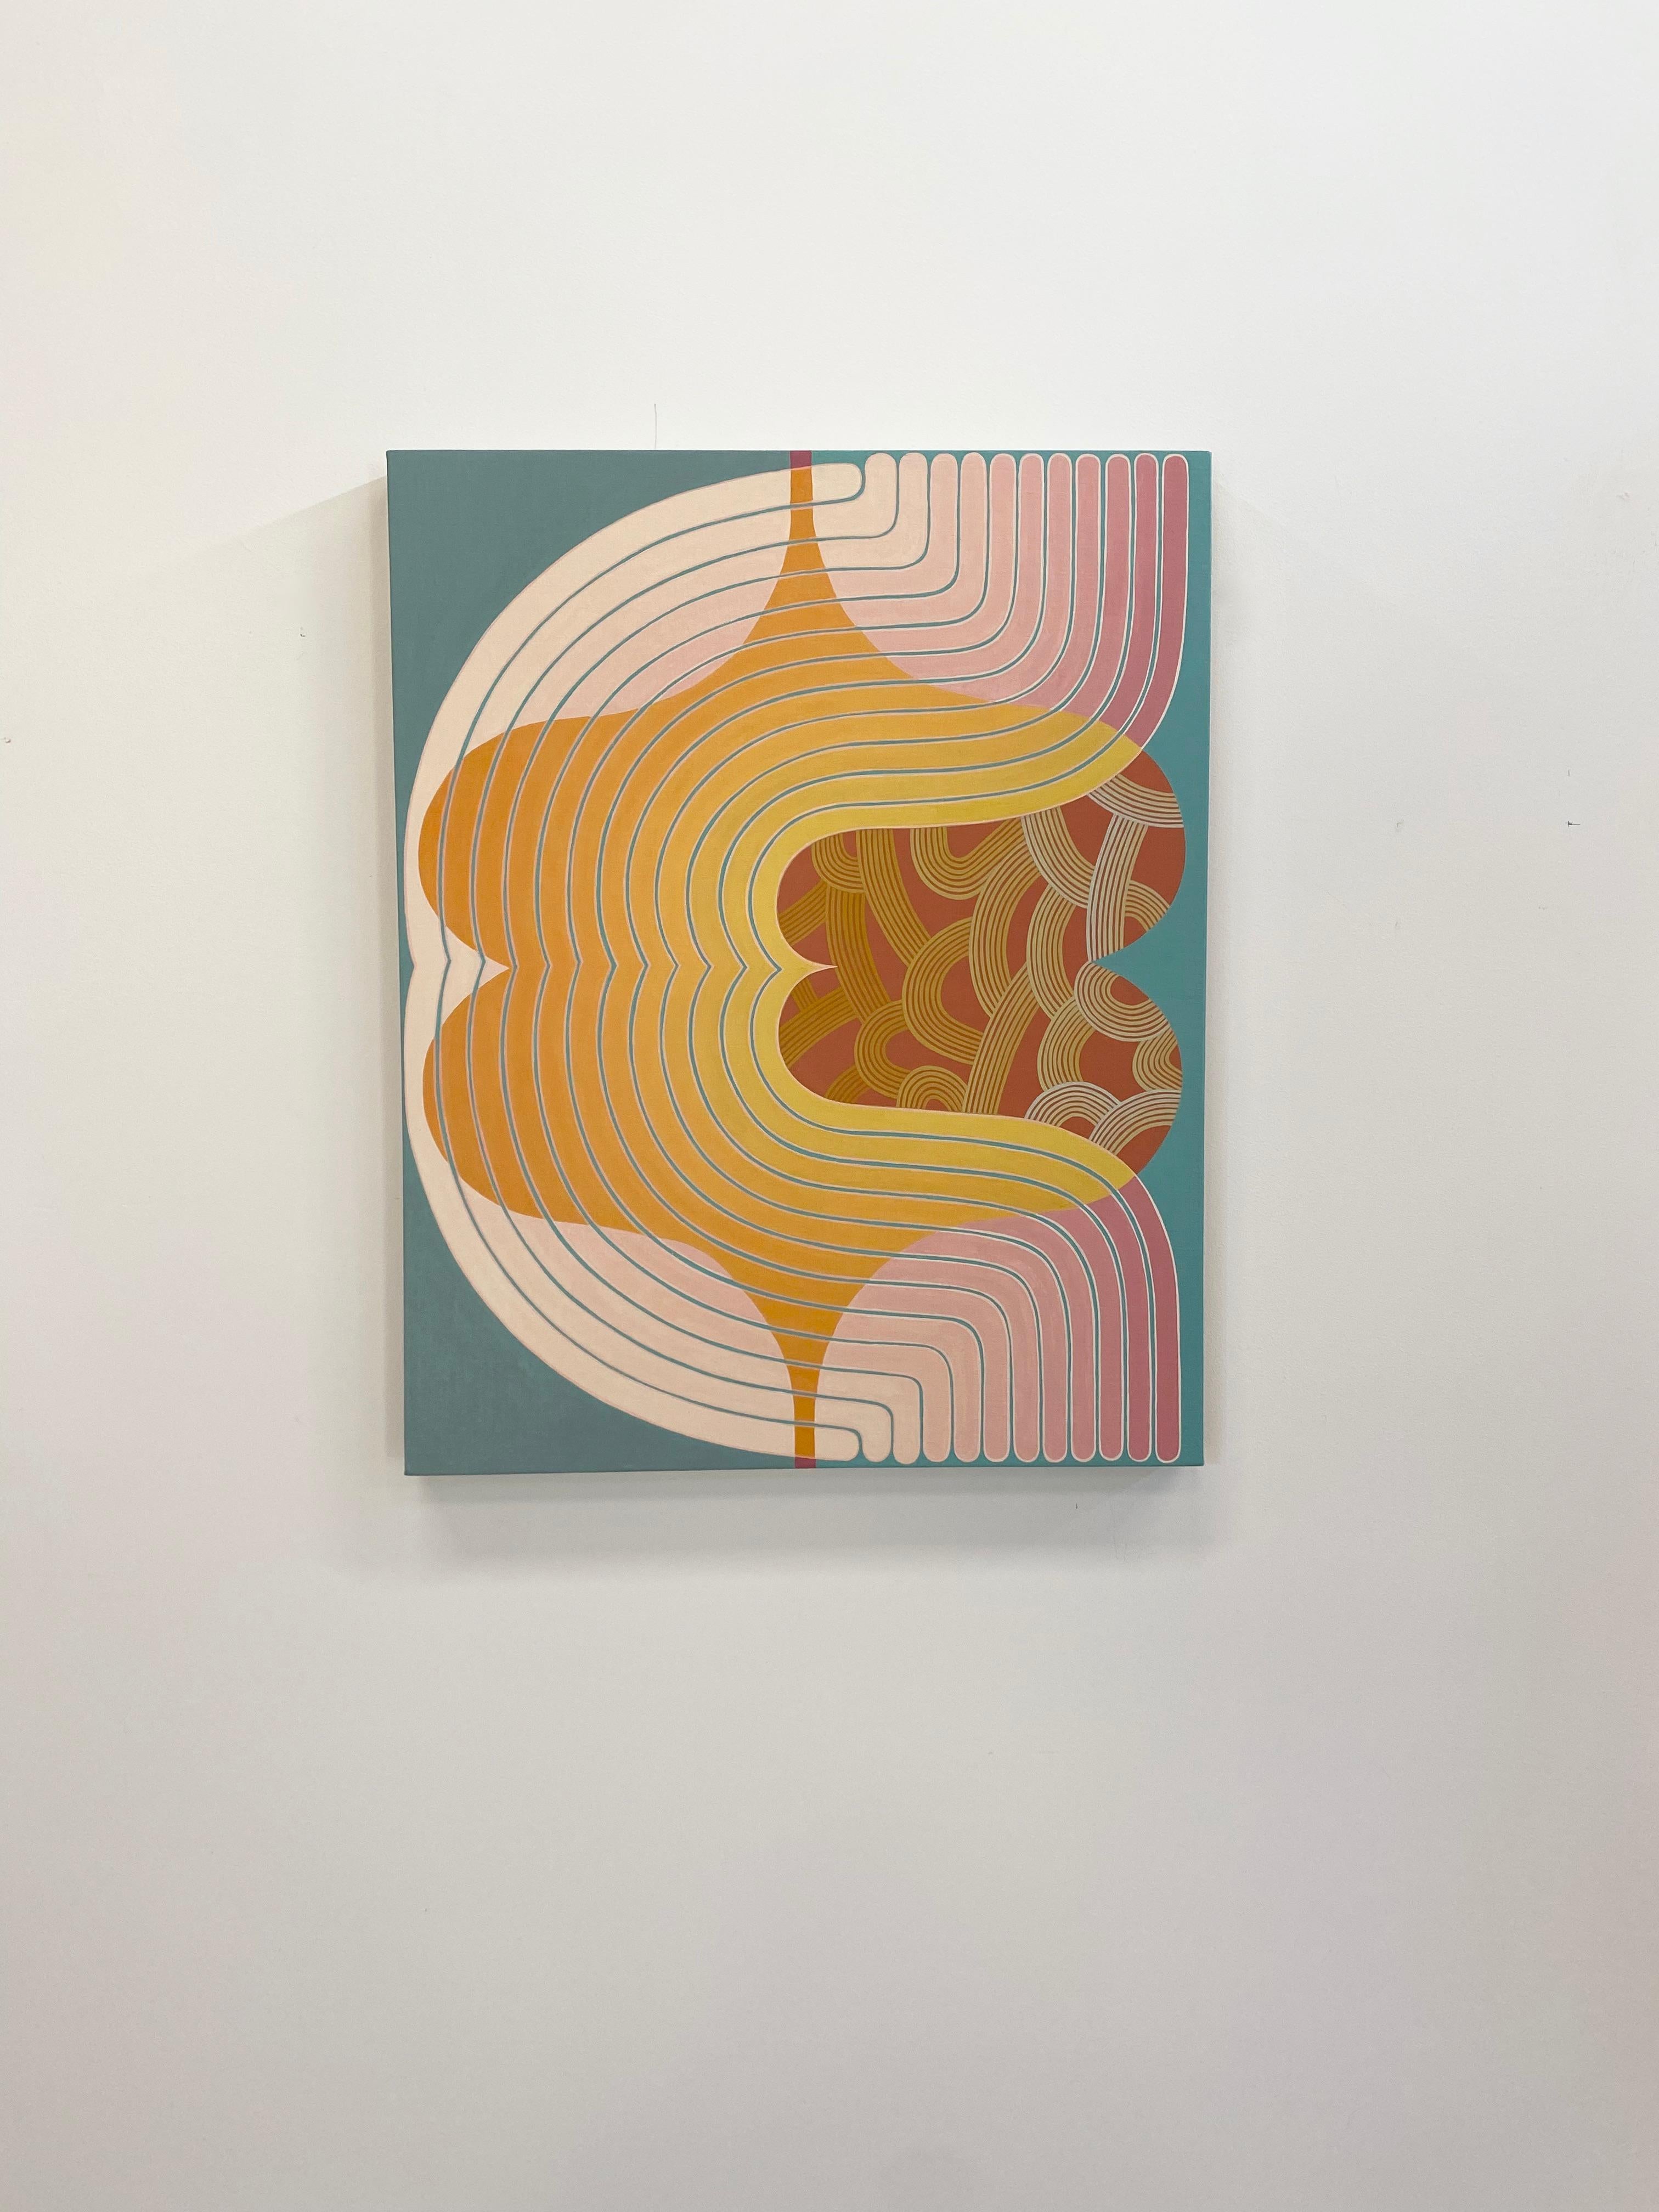 Sonics, Golden Orange, Pink, Teal, Dark Coral Geometric Abstract Curving Shapes - Painting by Jenny Kemp